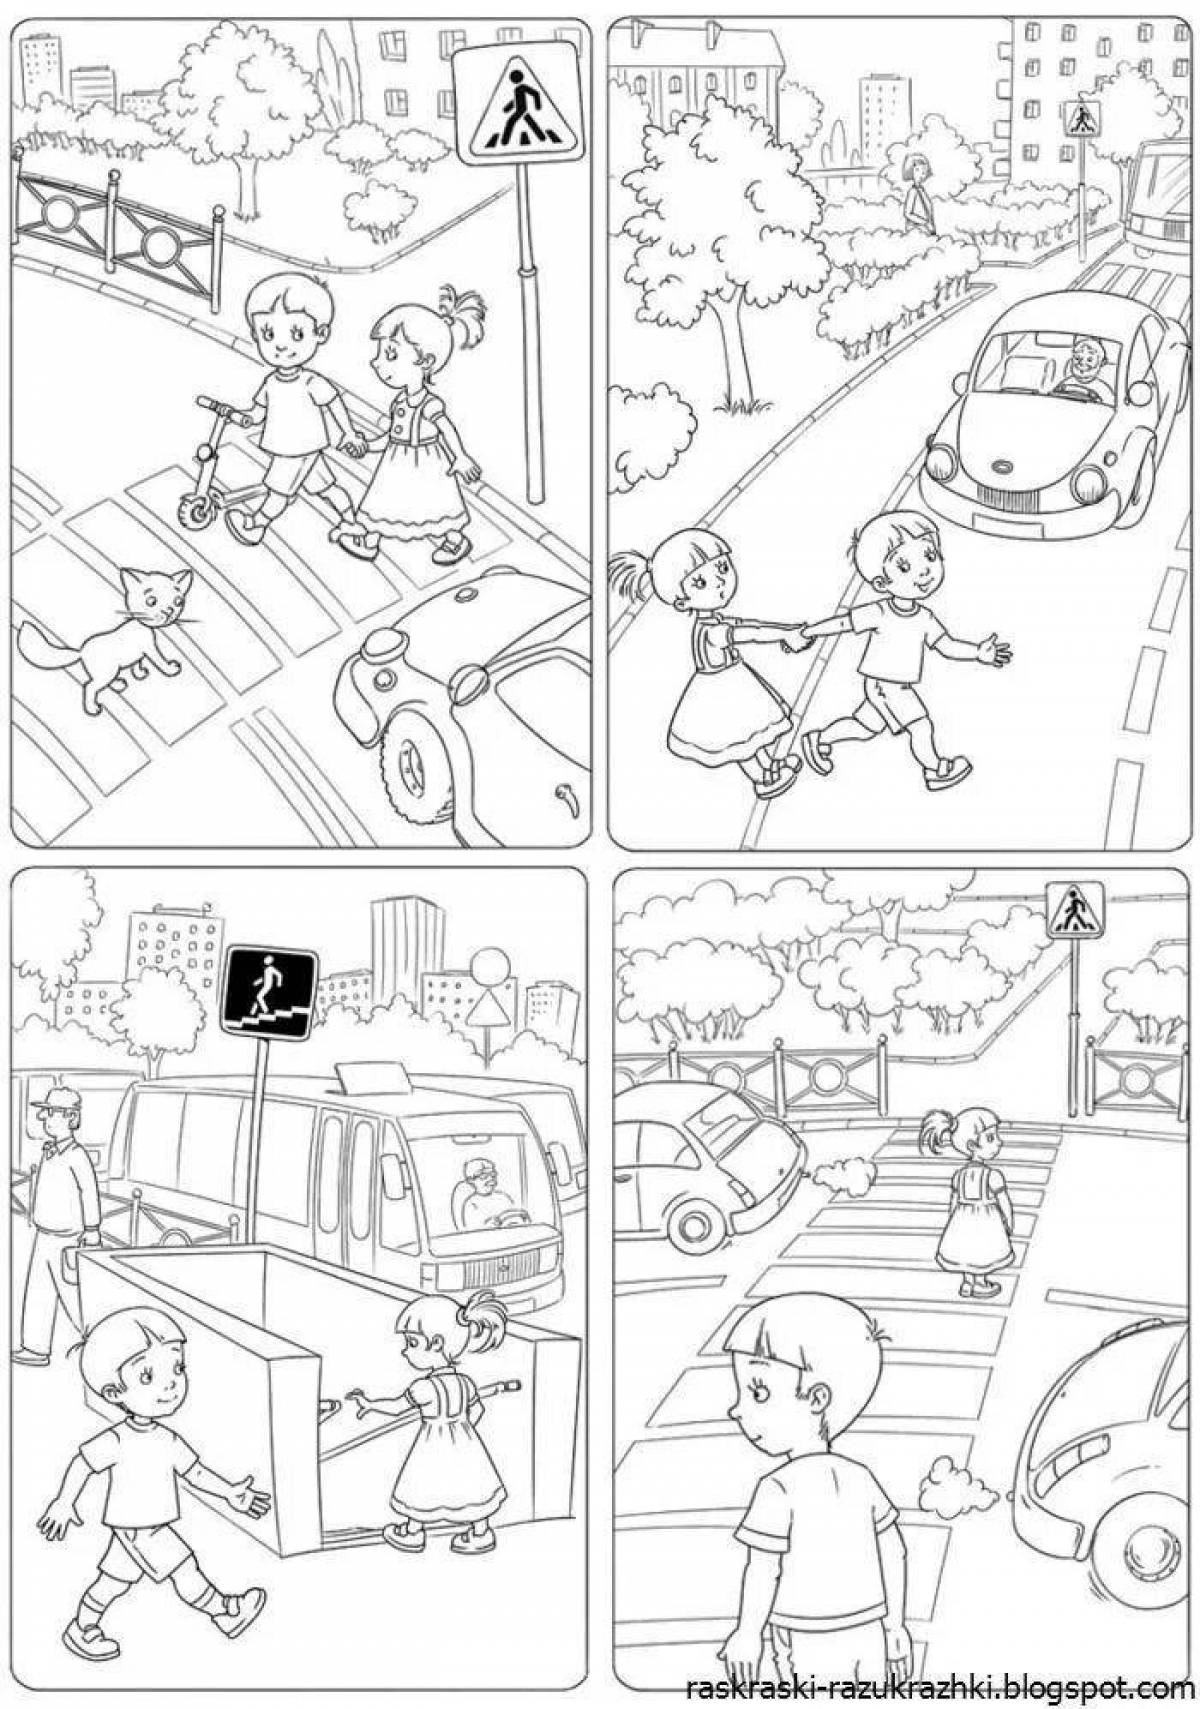 Amazing traffic rules 1st grade coloring book